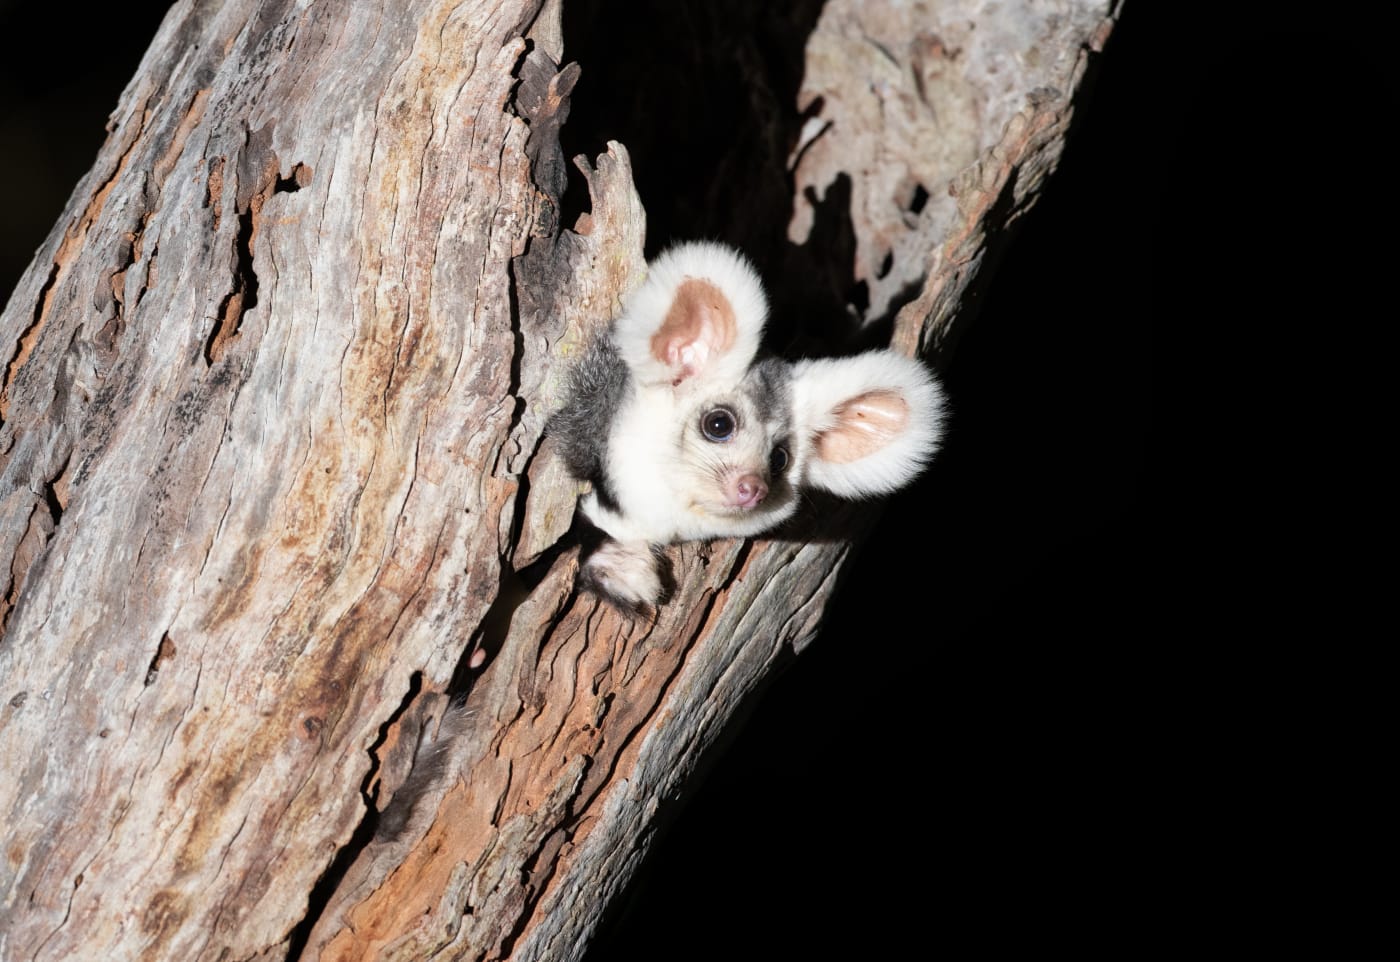 Greater glider in a patch of old-growth forest in Munruben, Logan City, south of Brisbane